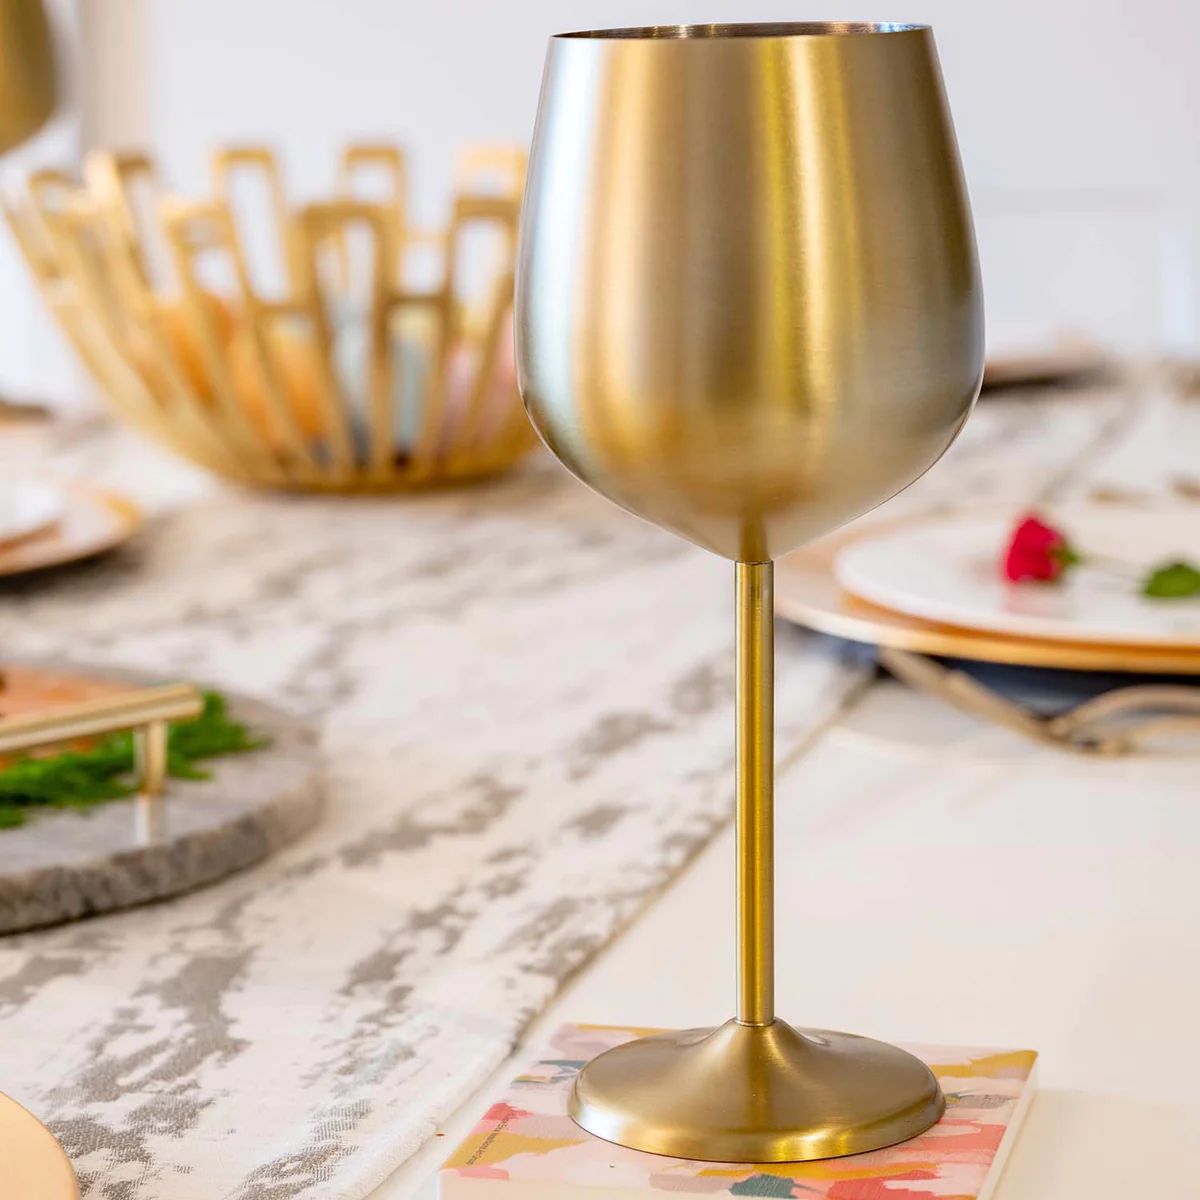 18 oz Brushed Gold Stainless Steel White Wine Goblets, 4-Piece Set | Cambridge Silversmiths